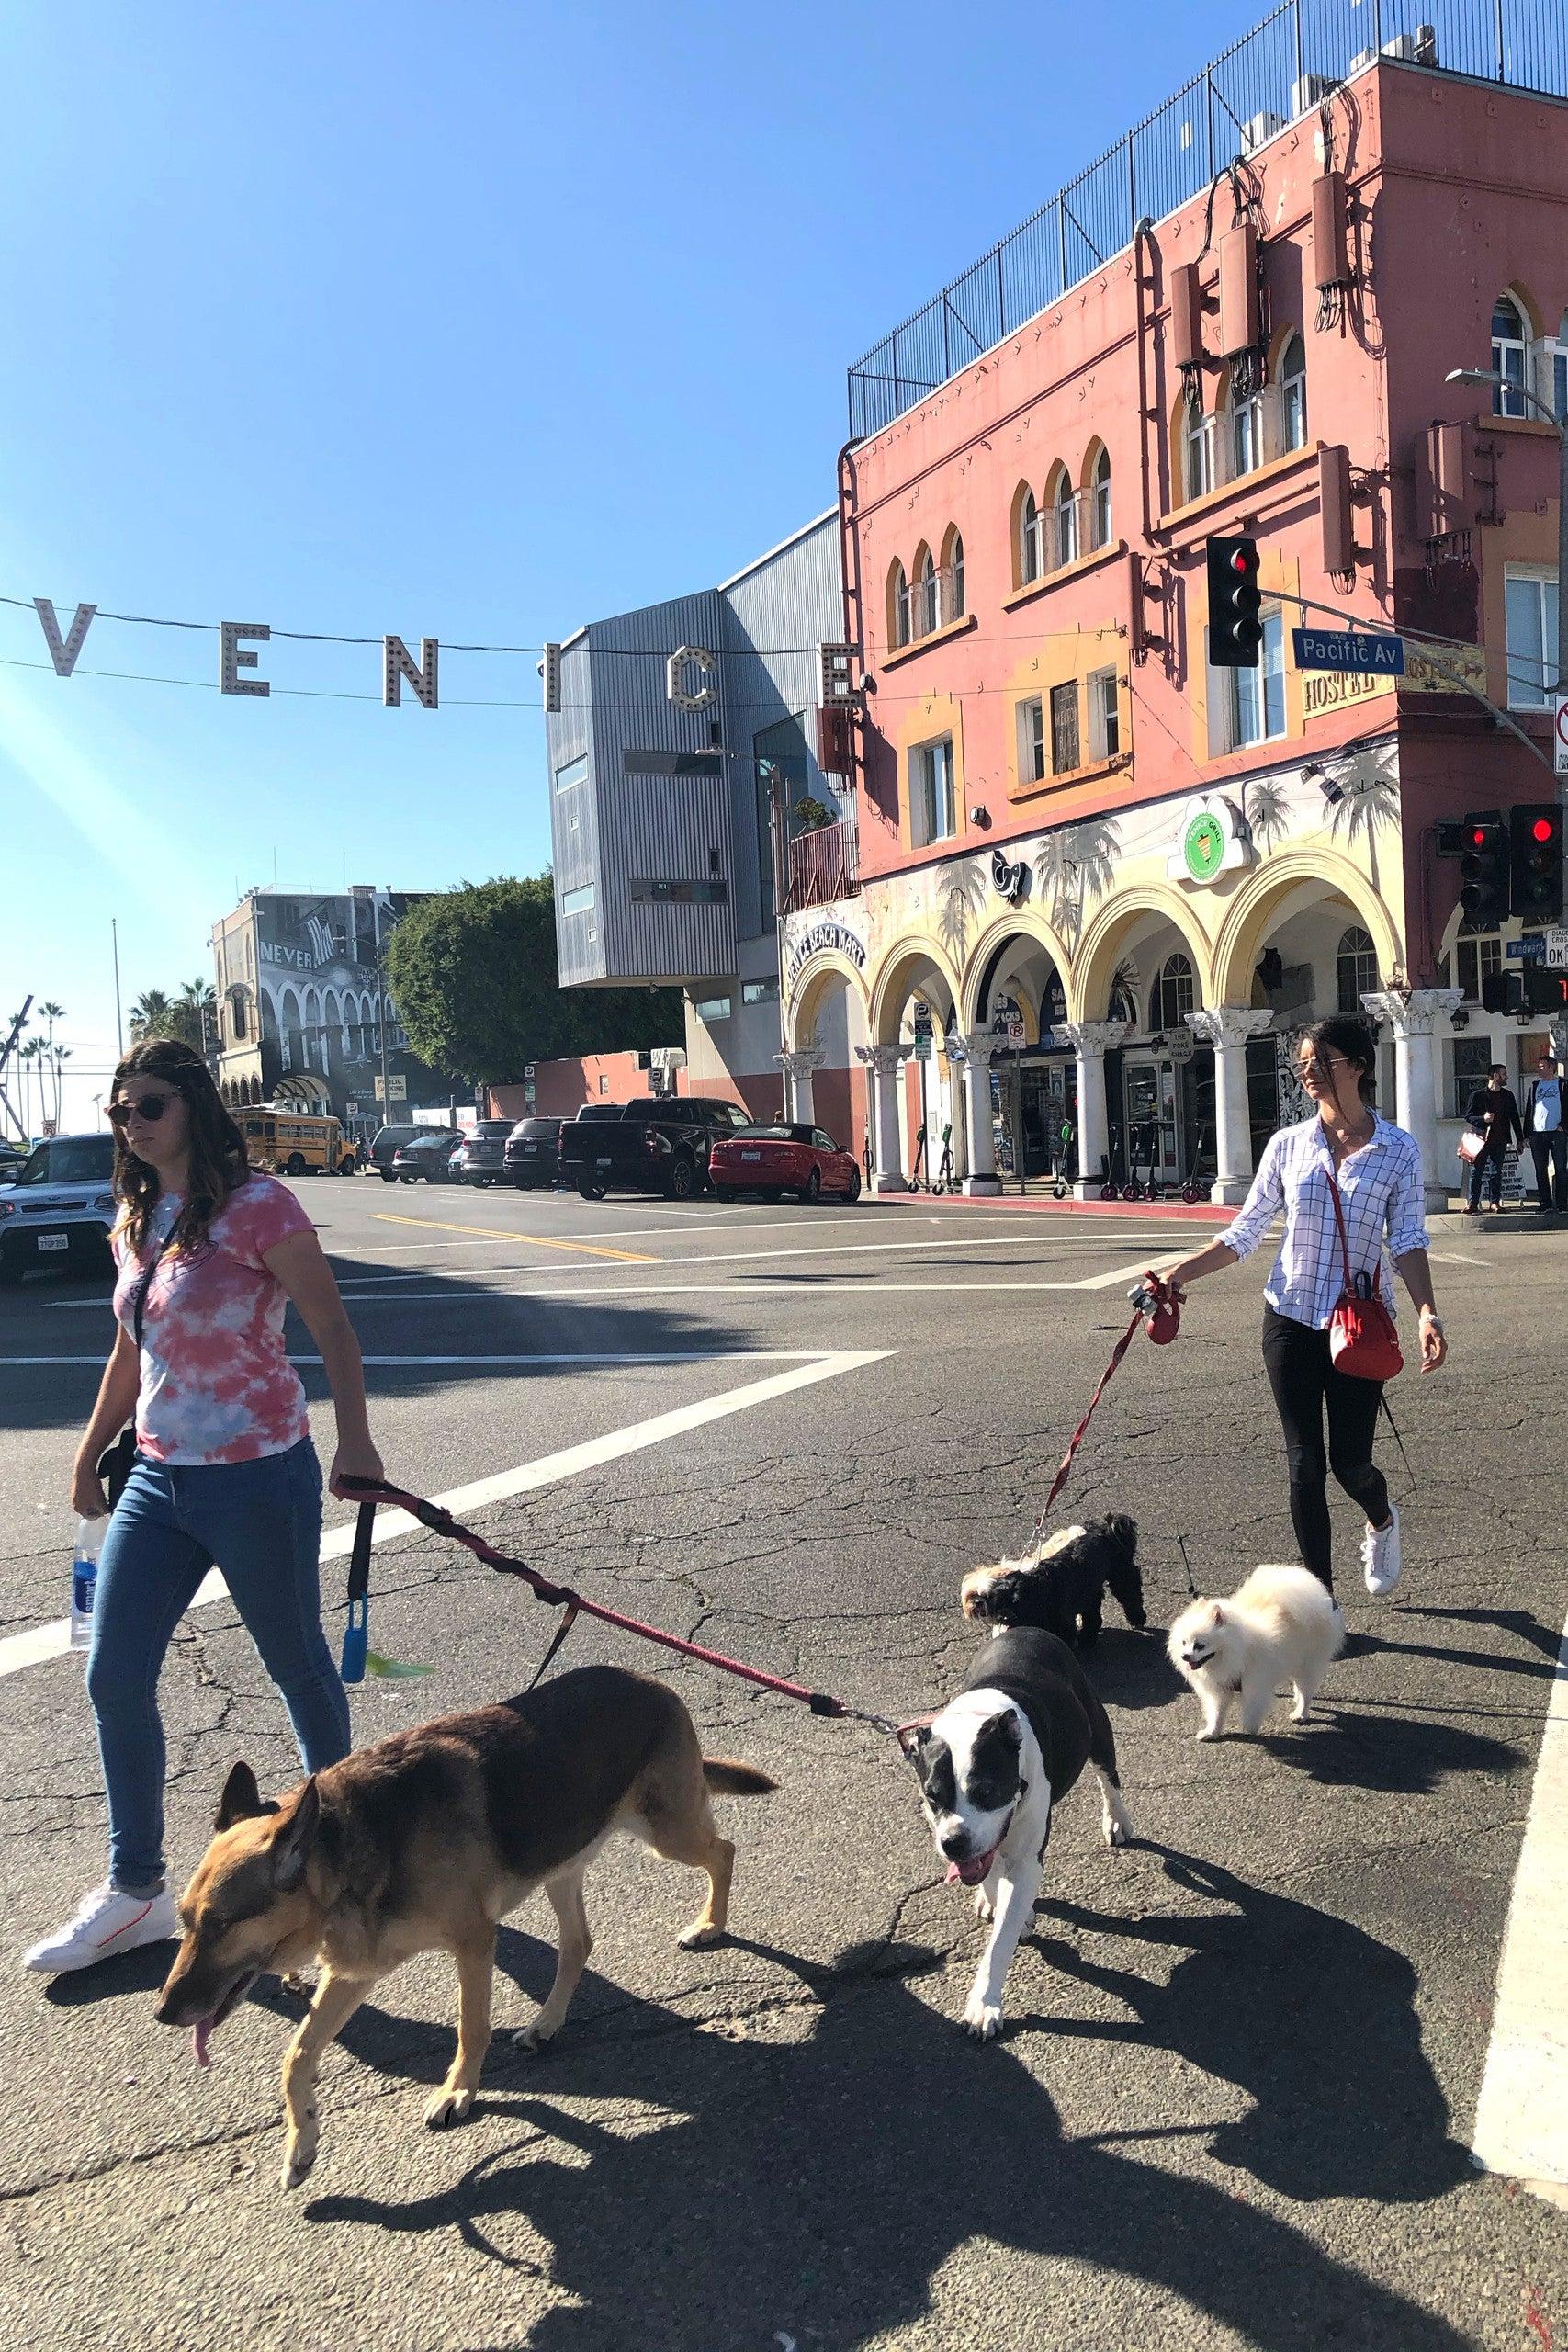 Pet Friendly Venice Beach Walking Tour with Rescue Dogs